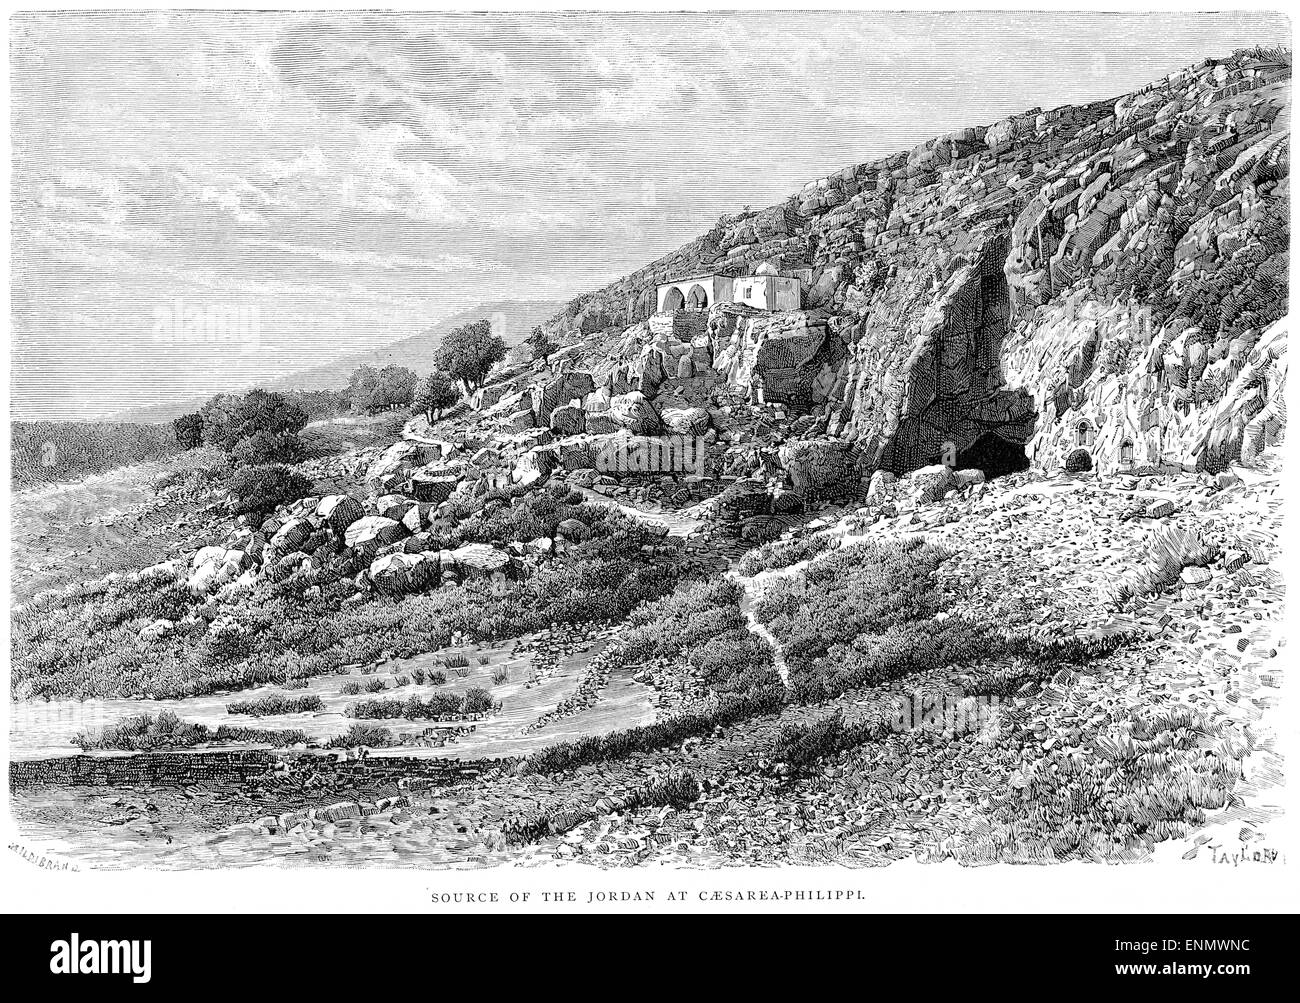 An engraving of the Source of the River Jordan at Caesarea Philippi scanned at high resolution from a book printed in 1889. Stock Photo